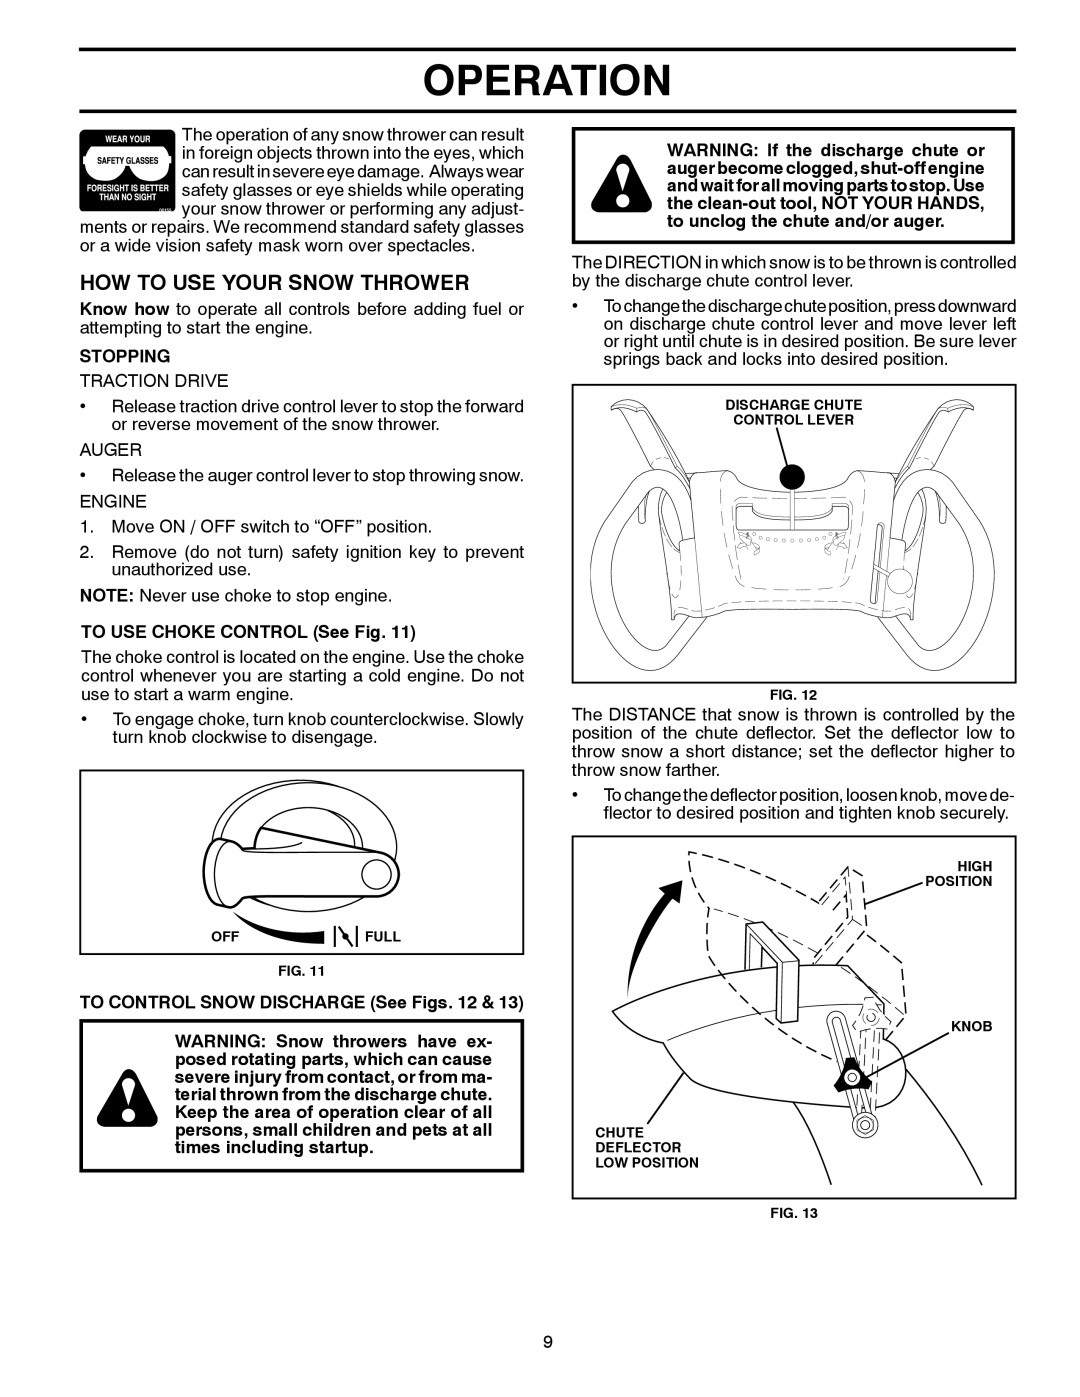 Poulan XT824ES, 96192003300 owner manual How To Use Your Snow Thrower, Operation, Stopping, TO USE CHOKE CONTROL See Fig 